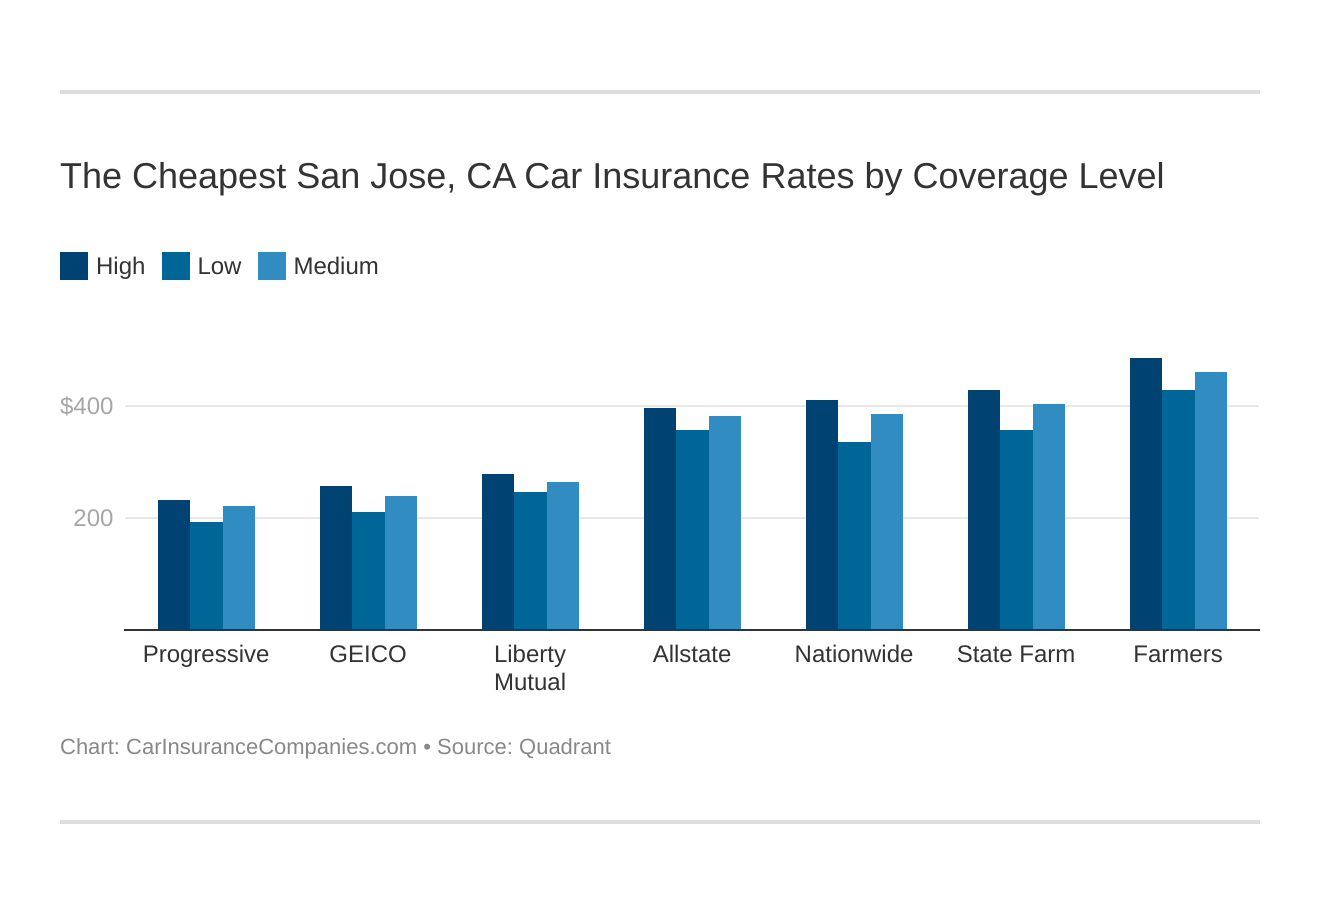 The Cheapest San Jose, CA Car Insurance Rates by Coverage Level